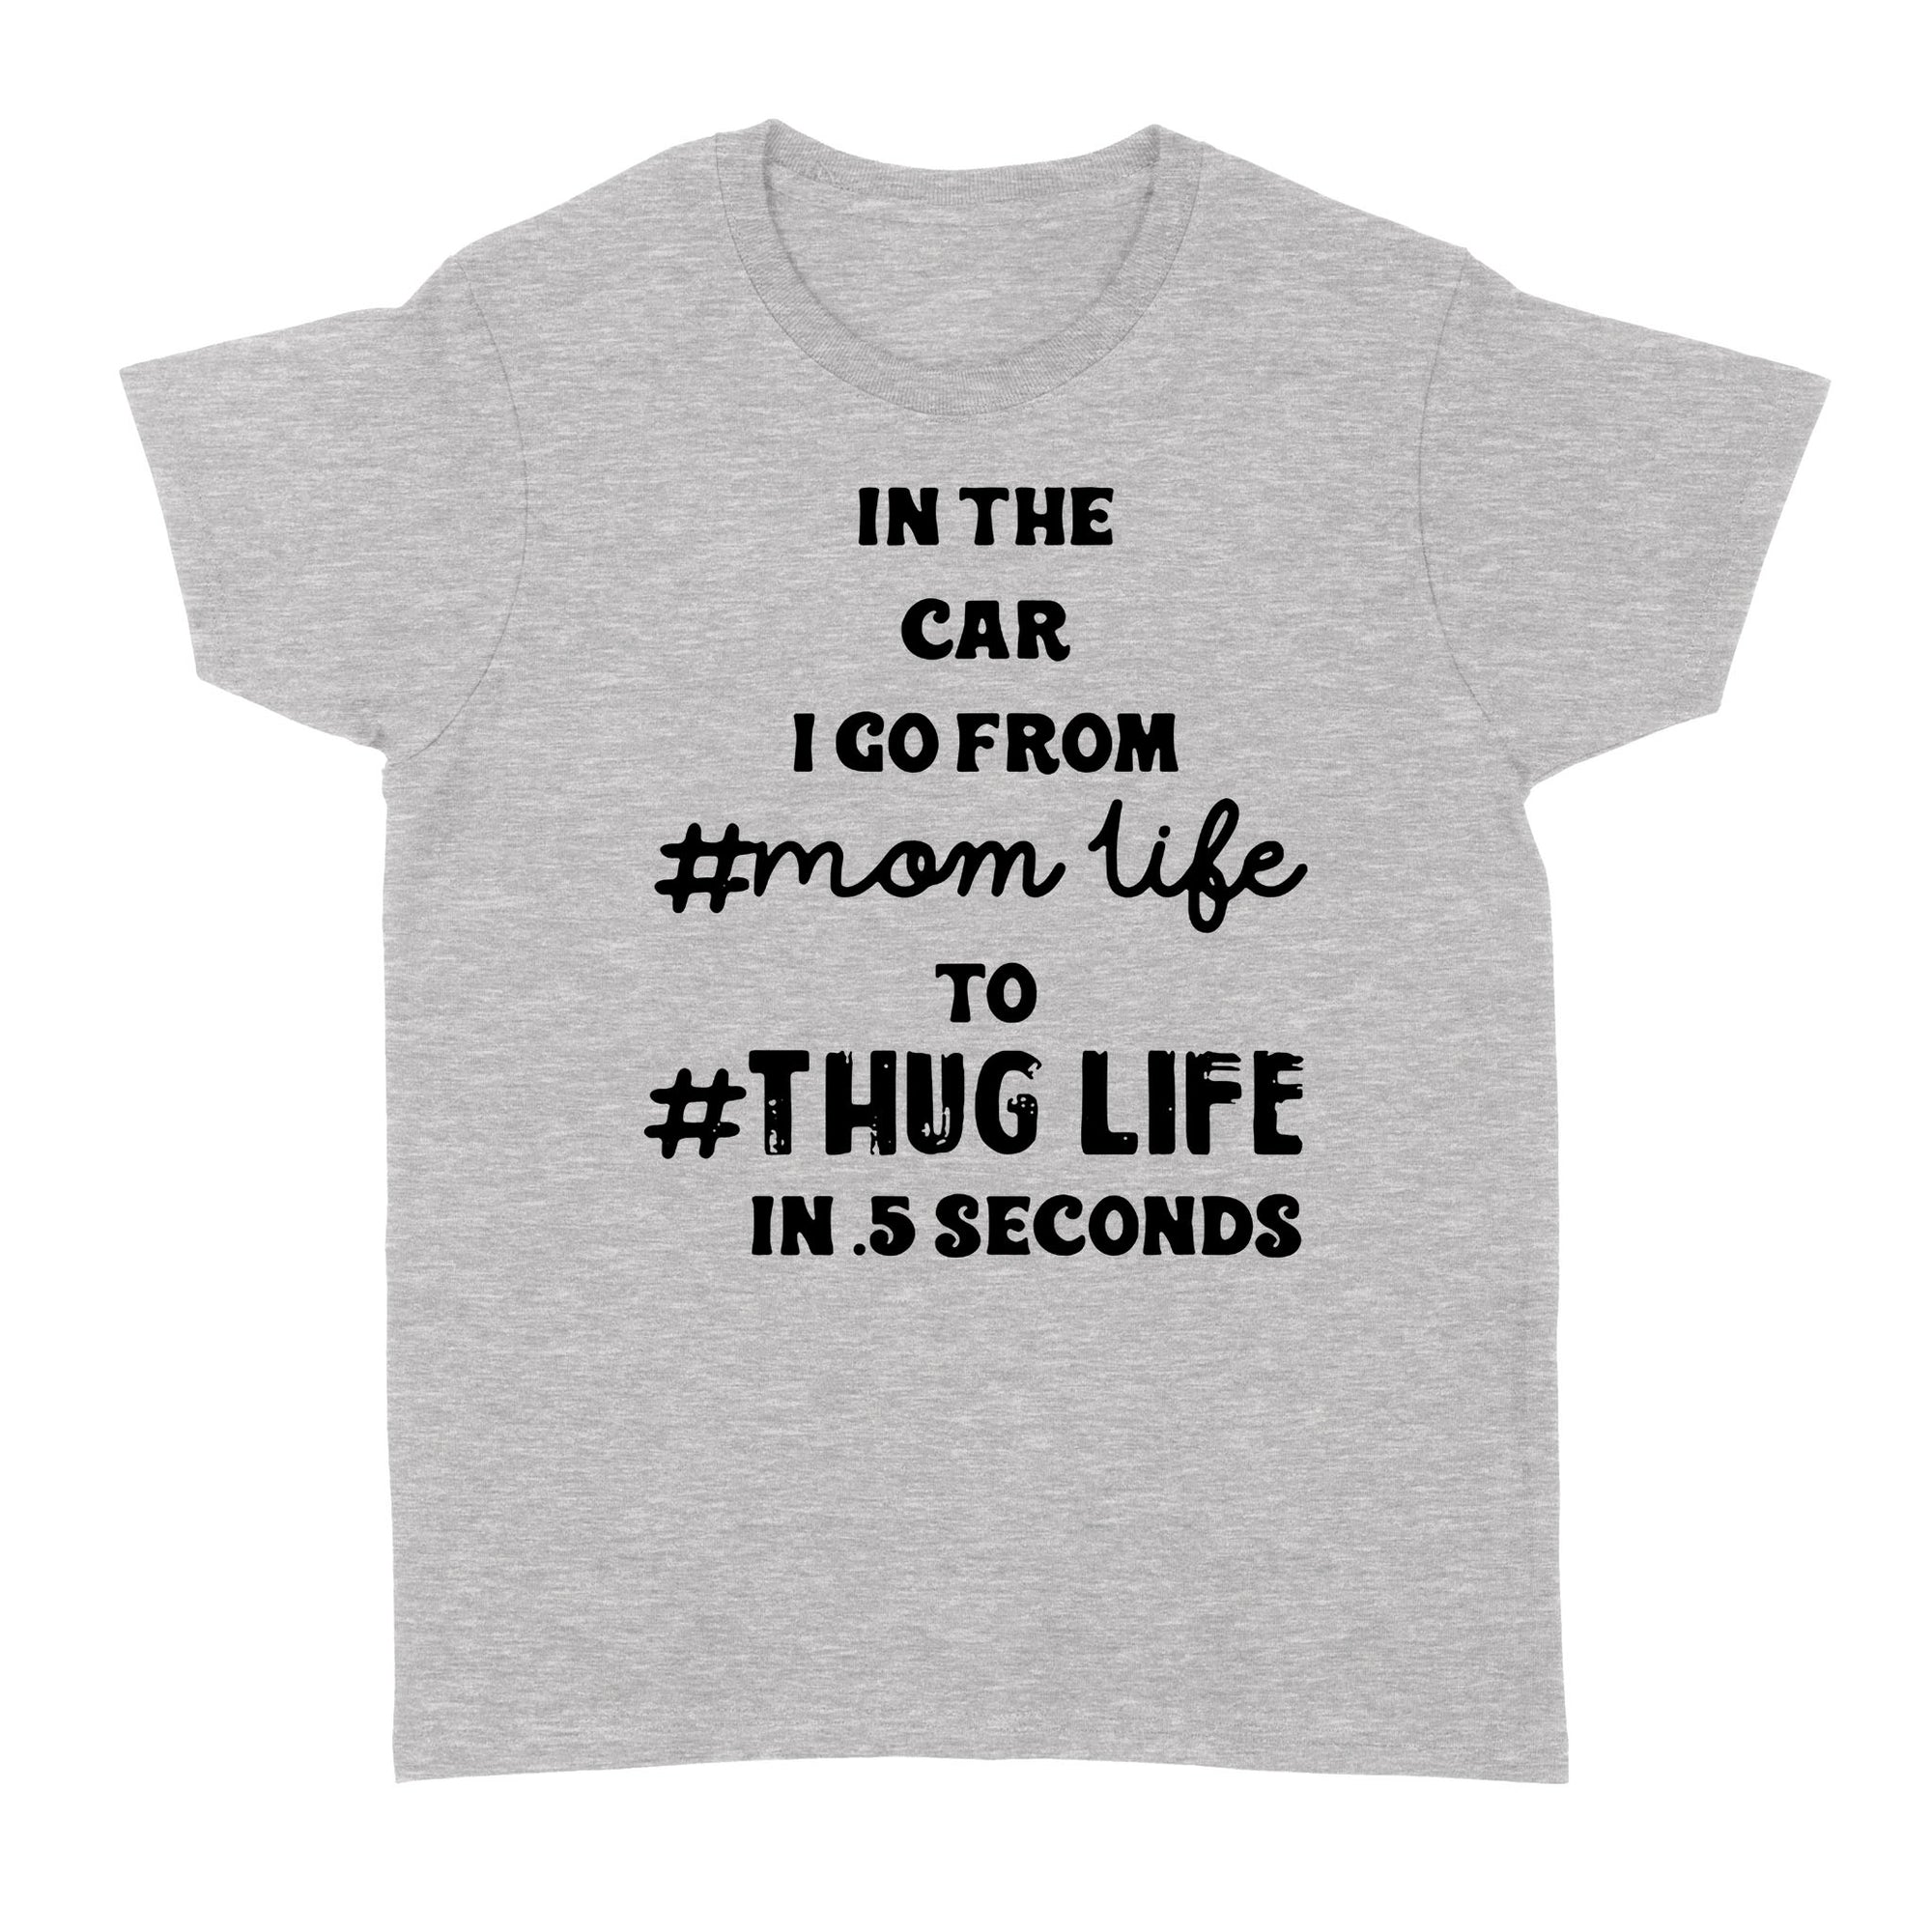 Gift Ideas for Mom Mothers Day In The Car I Go From #Mom Life To #Thug Life in 5 seconds - Standard Women's T-shirt